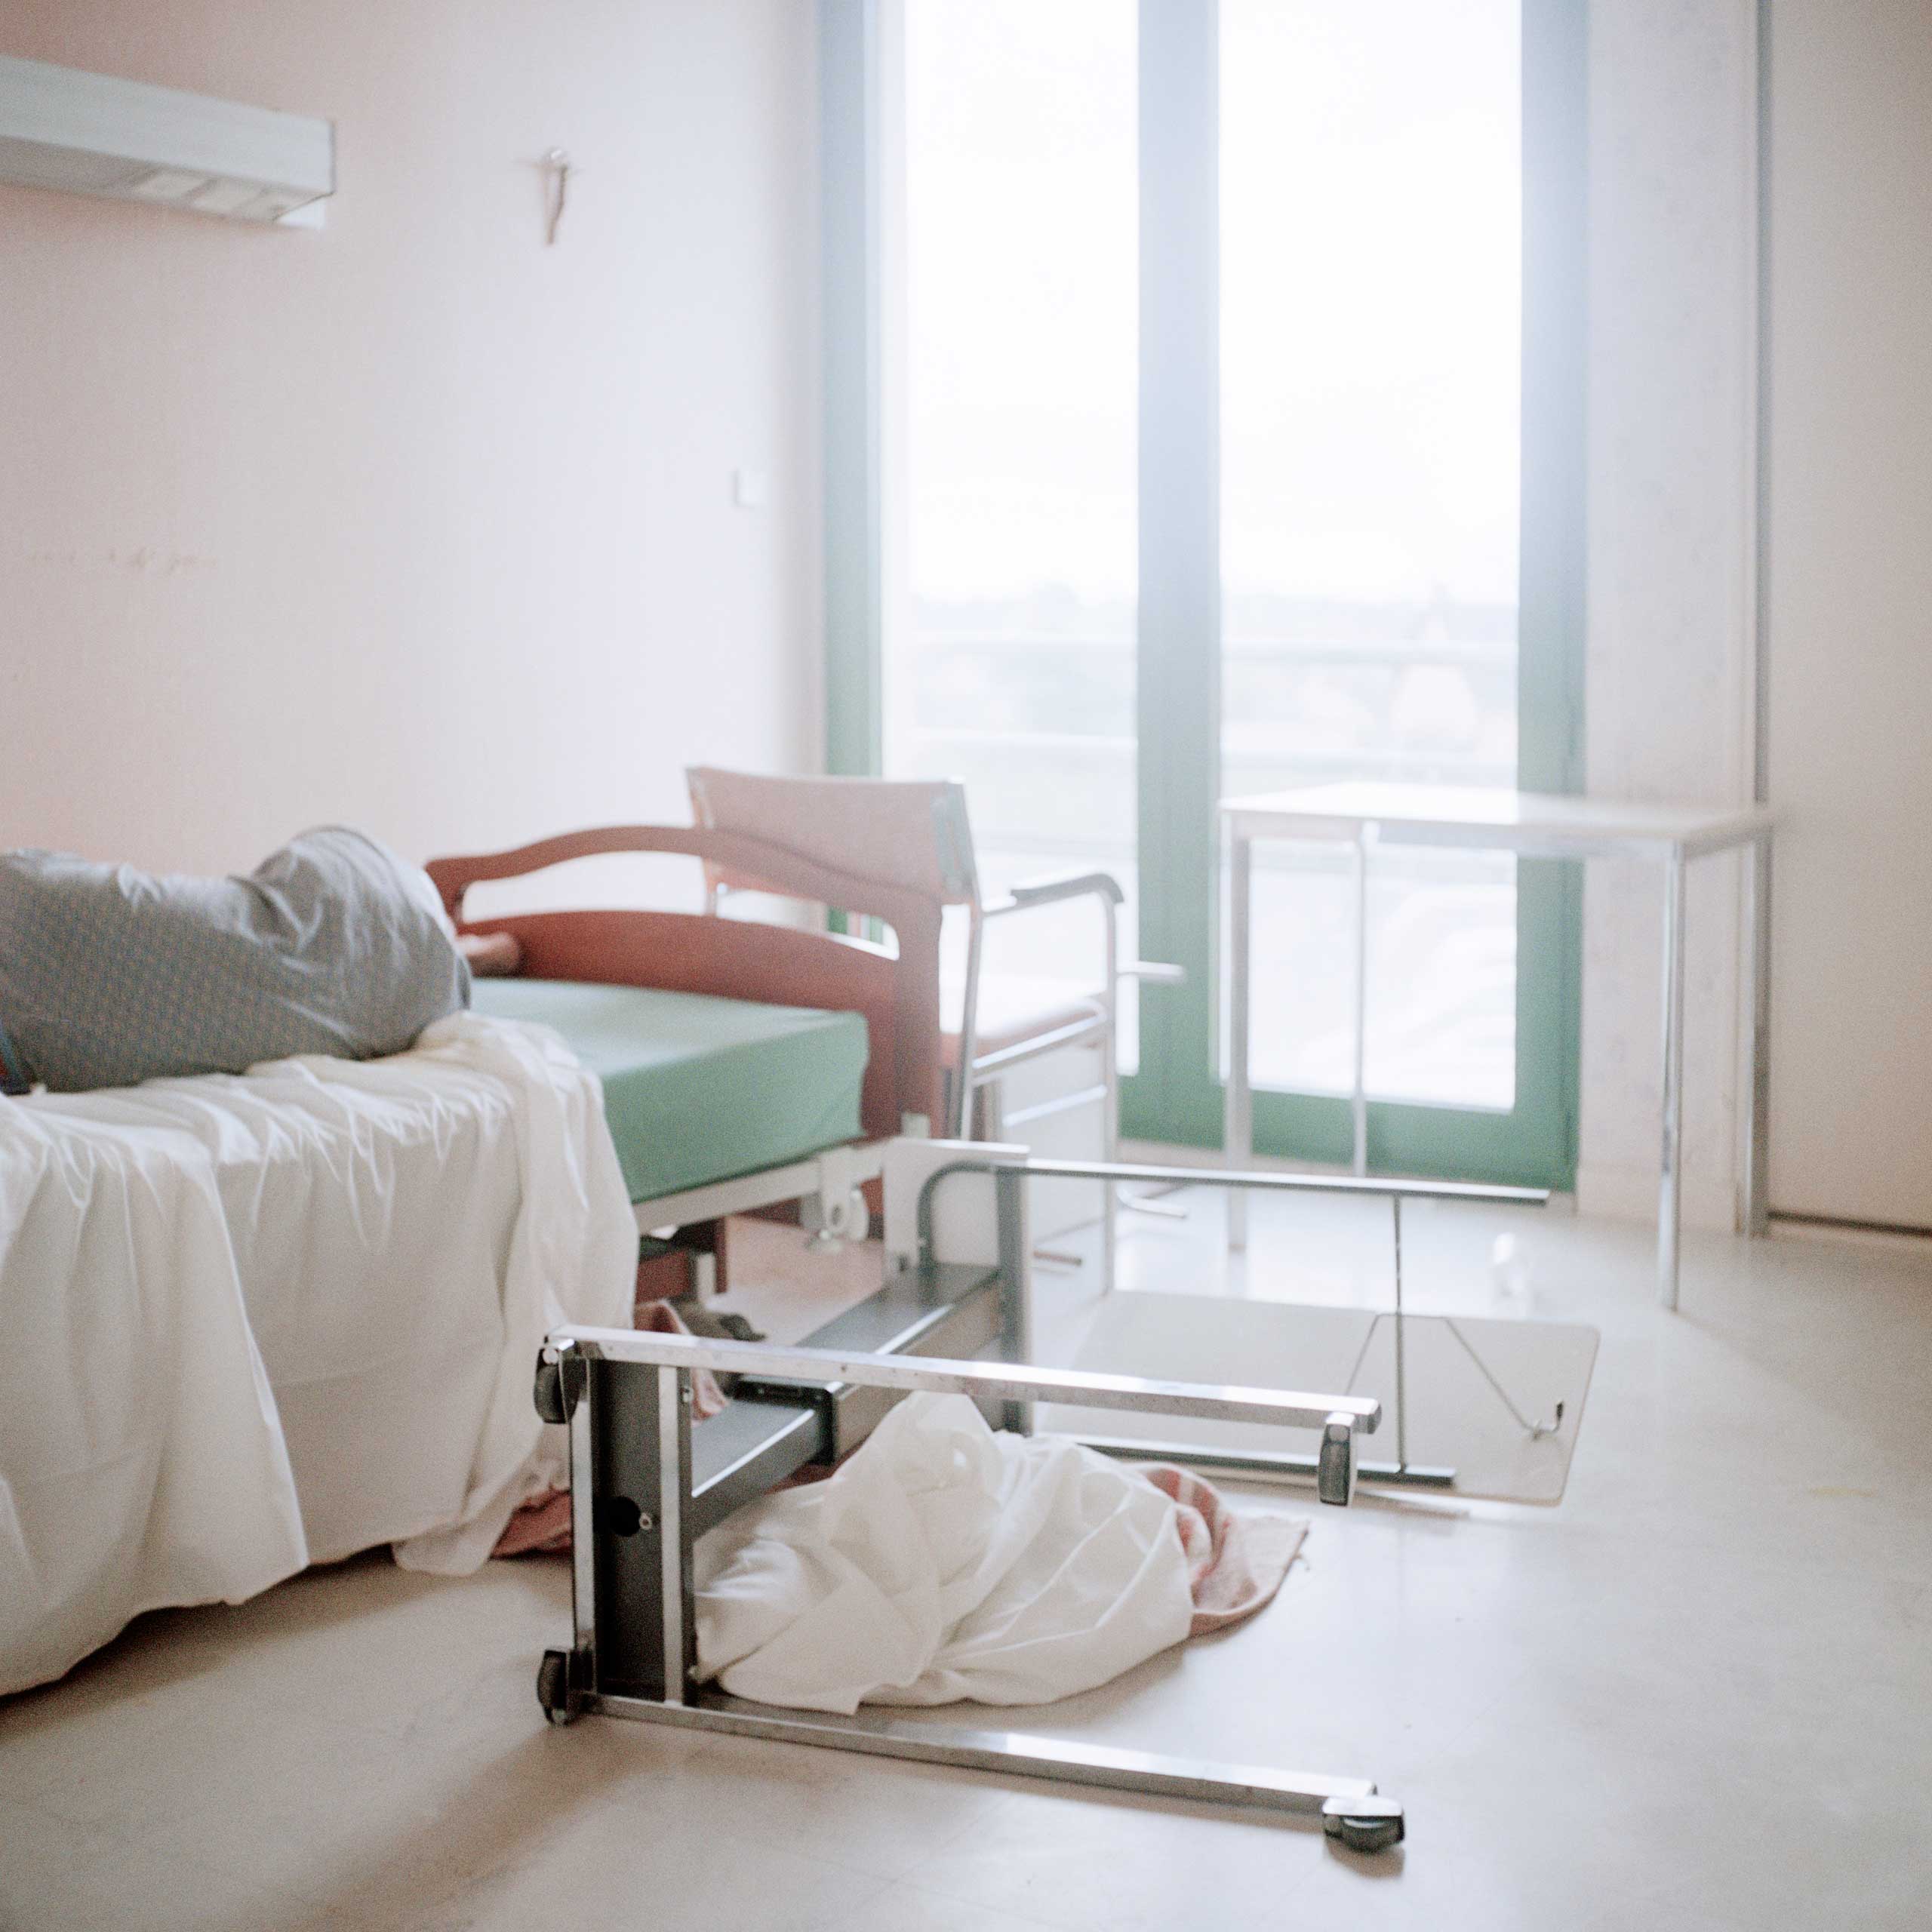 Evidence of a difficult night at 7 a.m. in a room in the Alzheimer’s ward. Alzheimer’s disease can cause behaviour difficulties such as aggressiveness, eating disorders, increased anxiety or depressive tendencies.